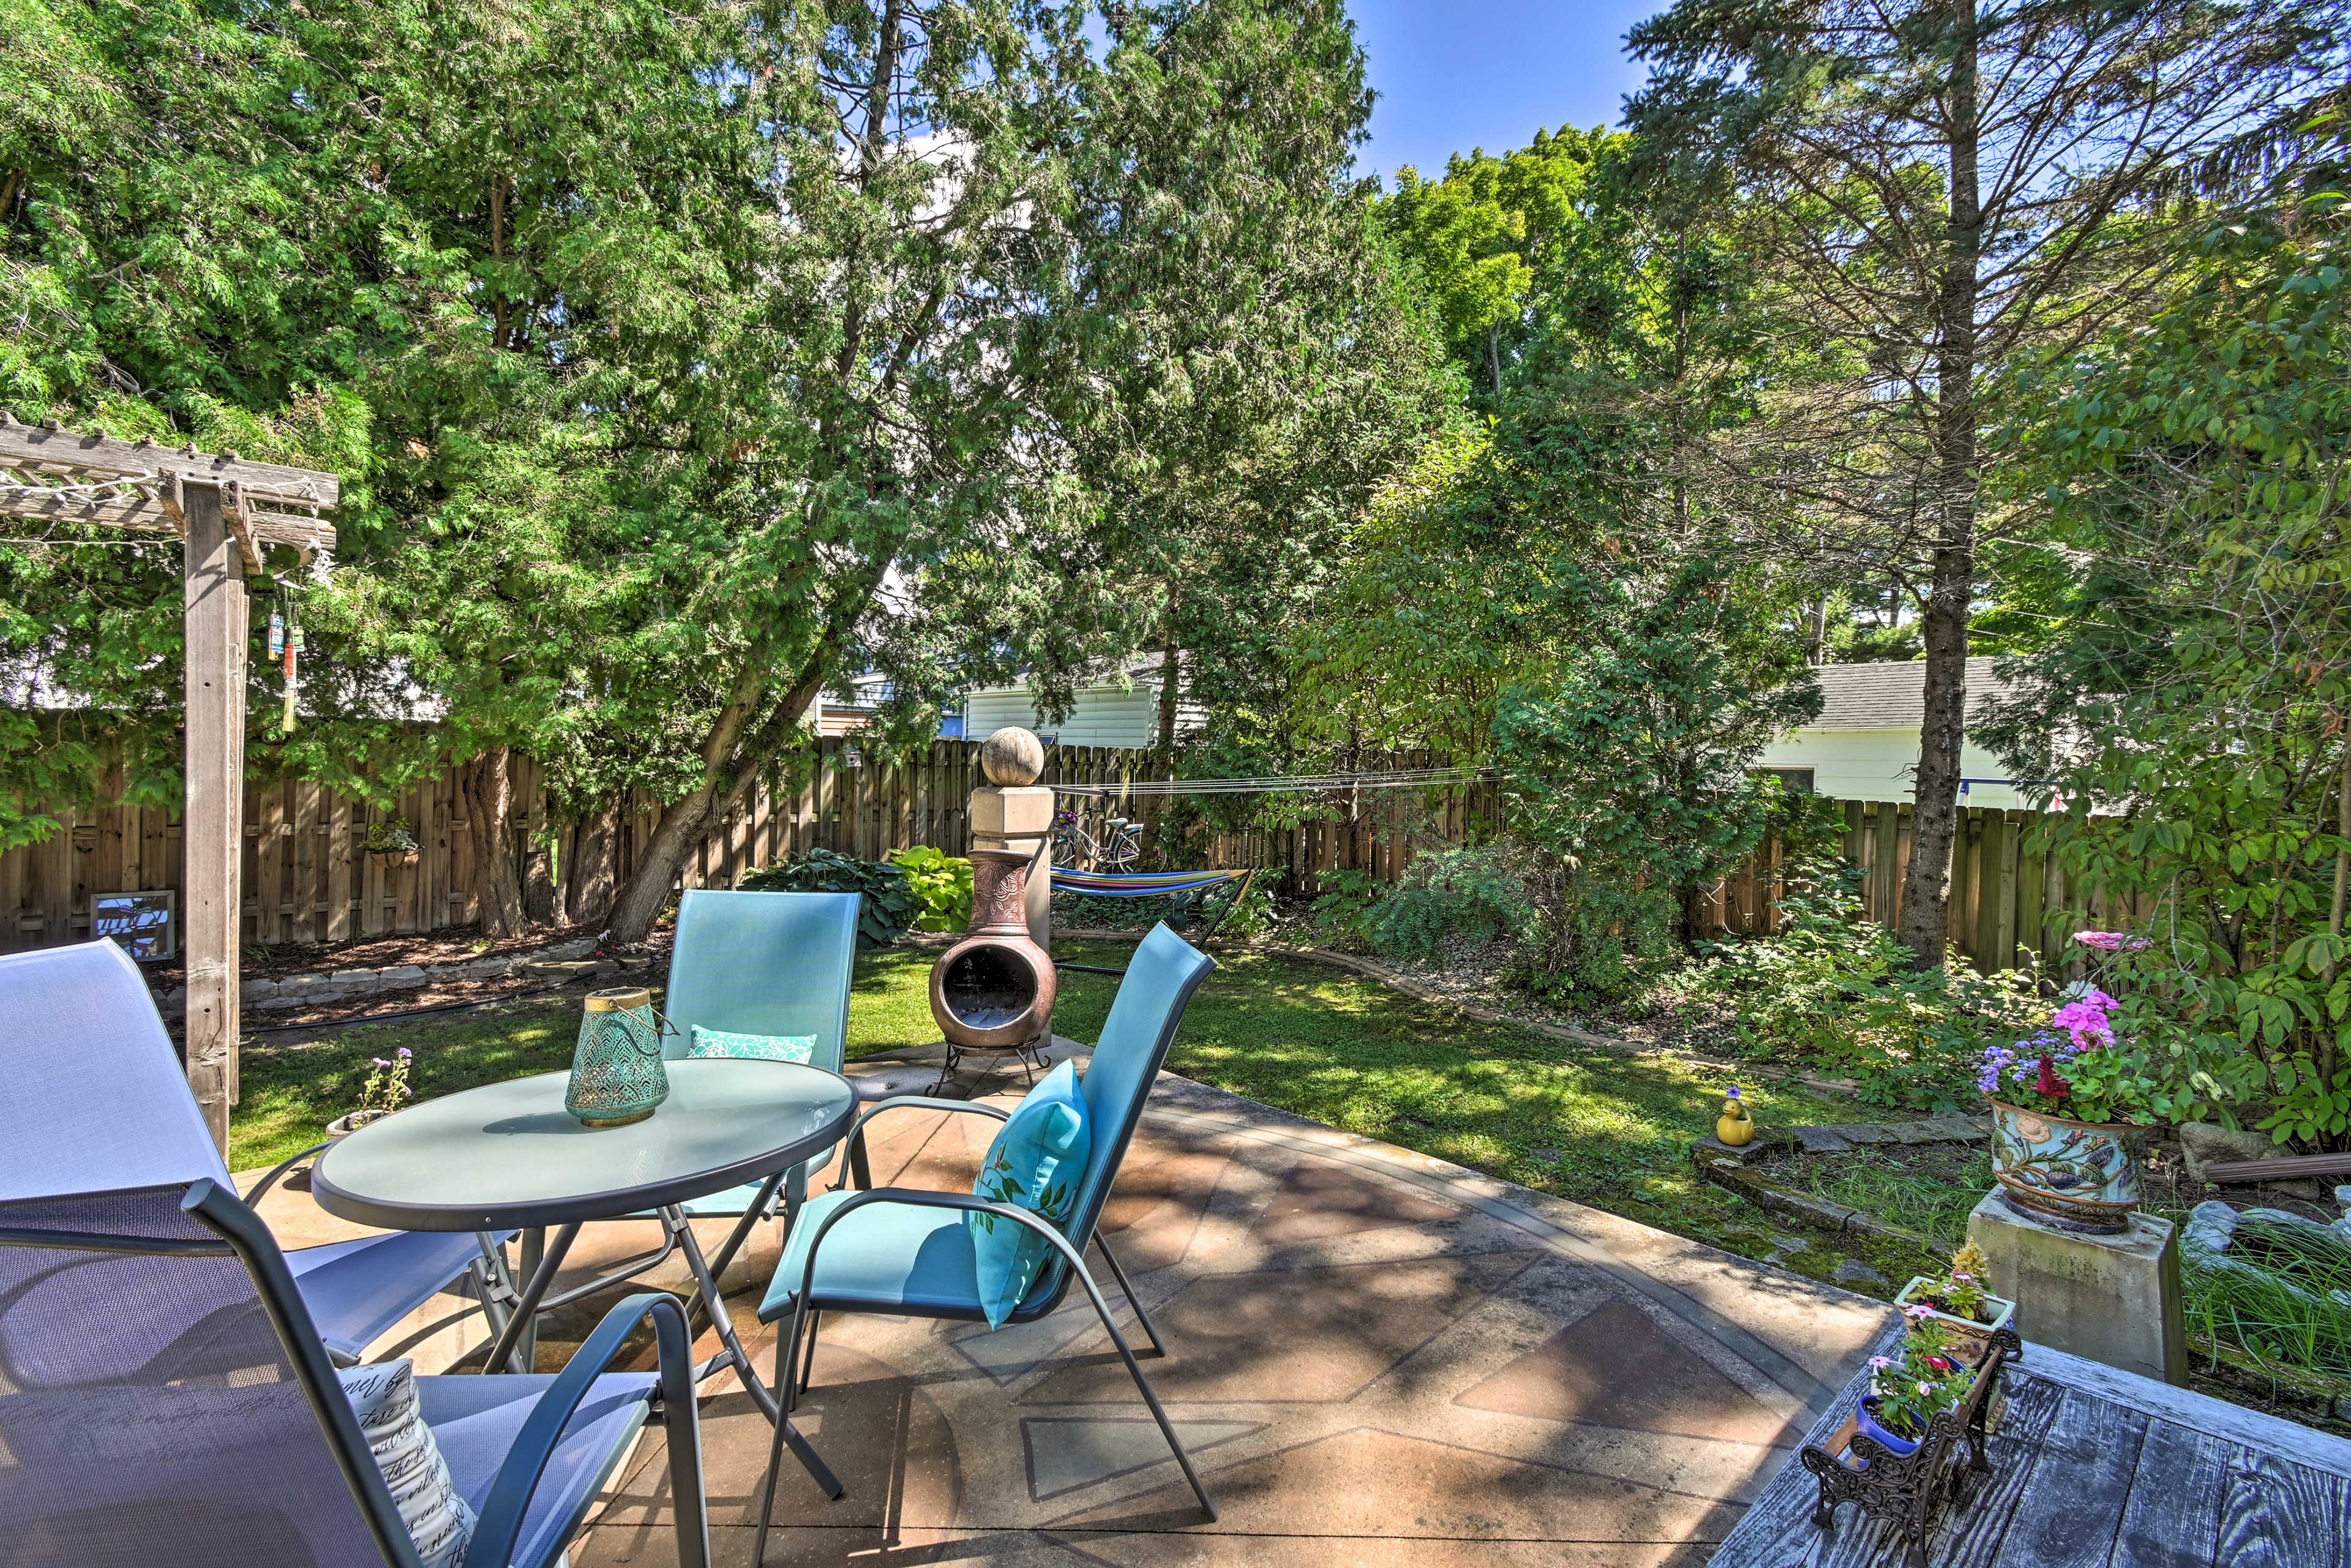 The backyard boasts a patio that's perfect for dining in the summer months.